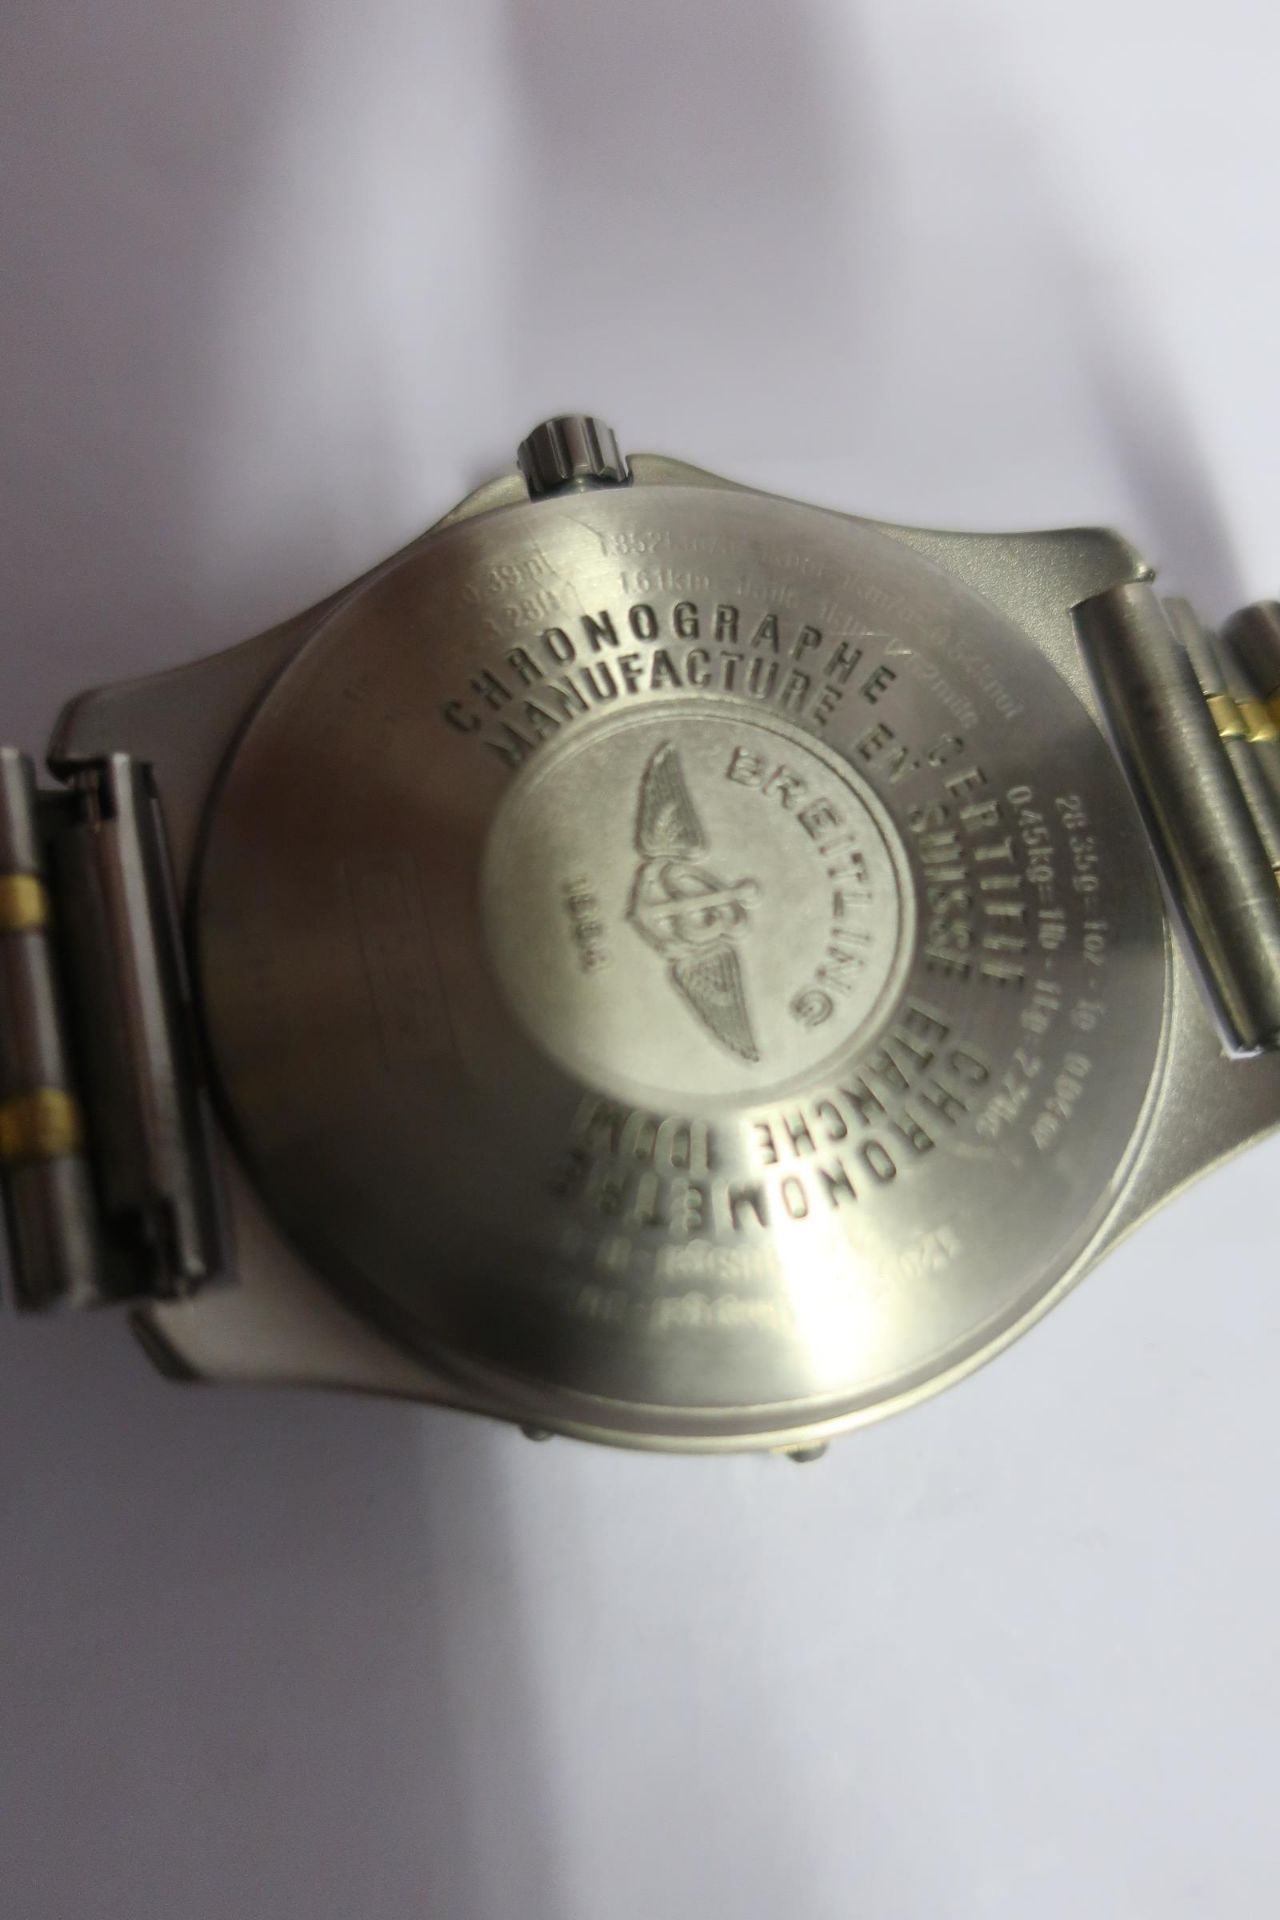 One man's pre-owned Breitling Aerospace chronometer quartz watch (Recently repaired/serviced). - Image 3 of 4